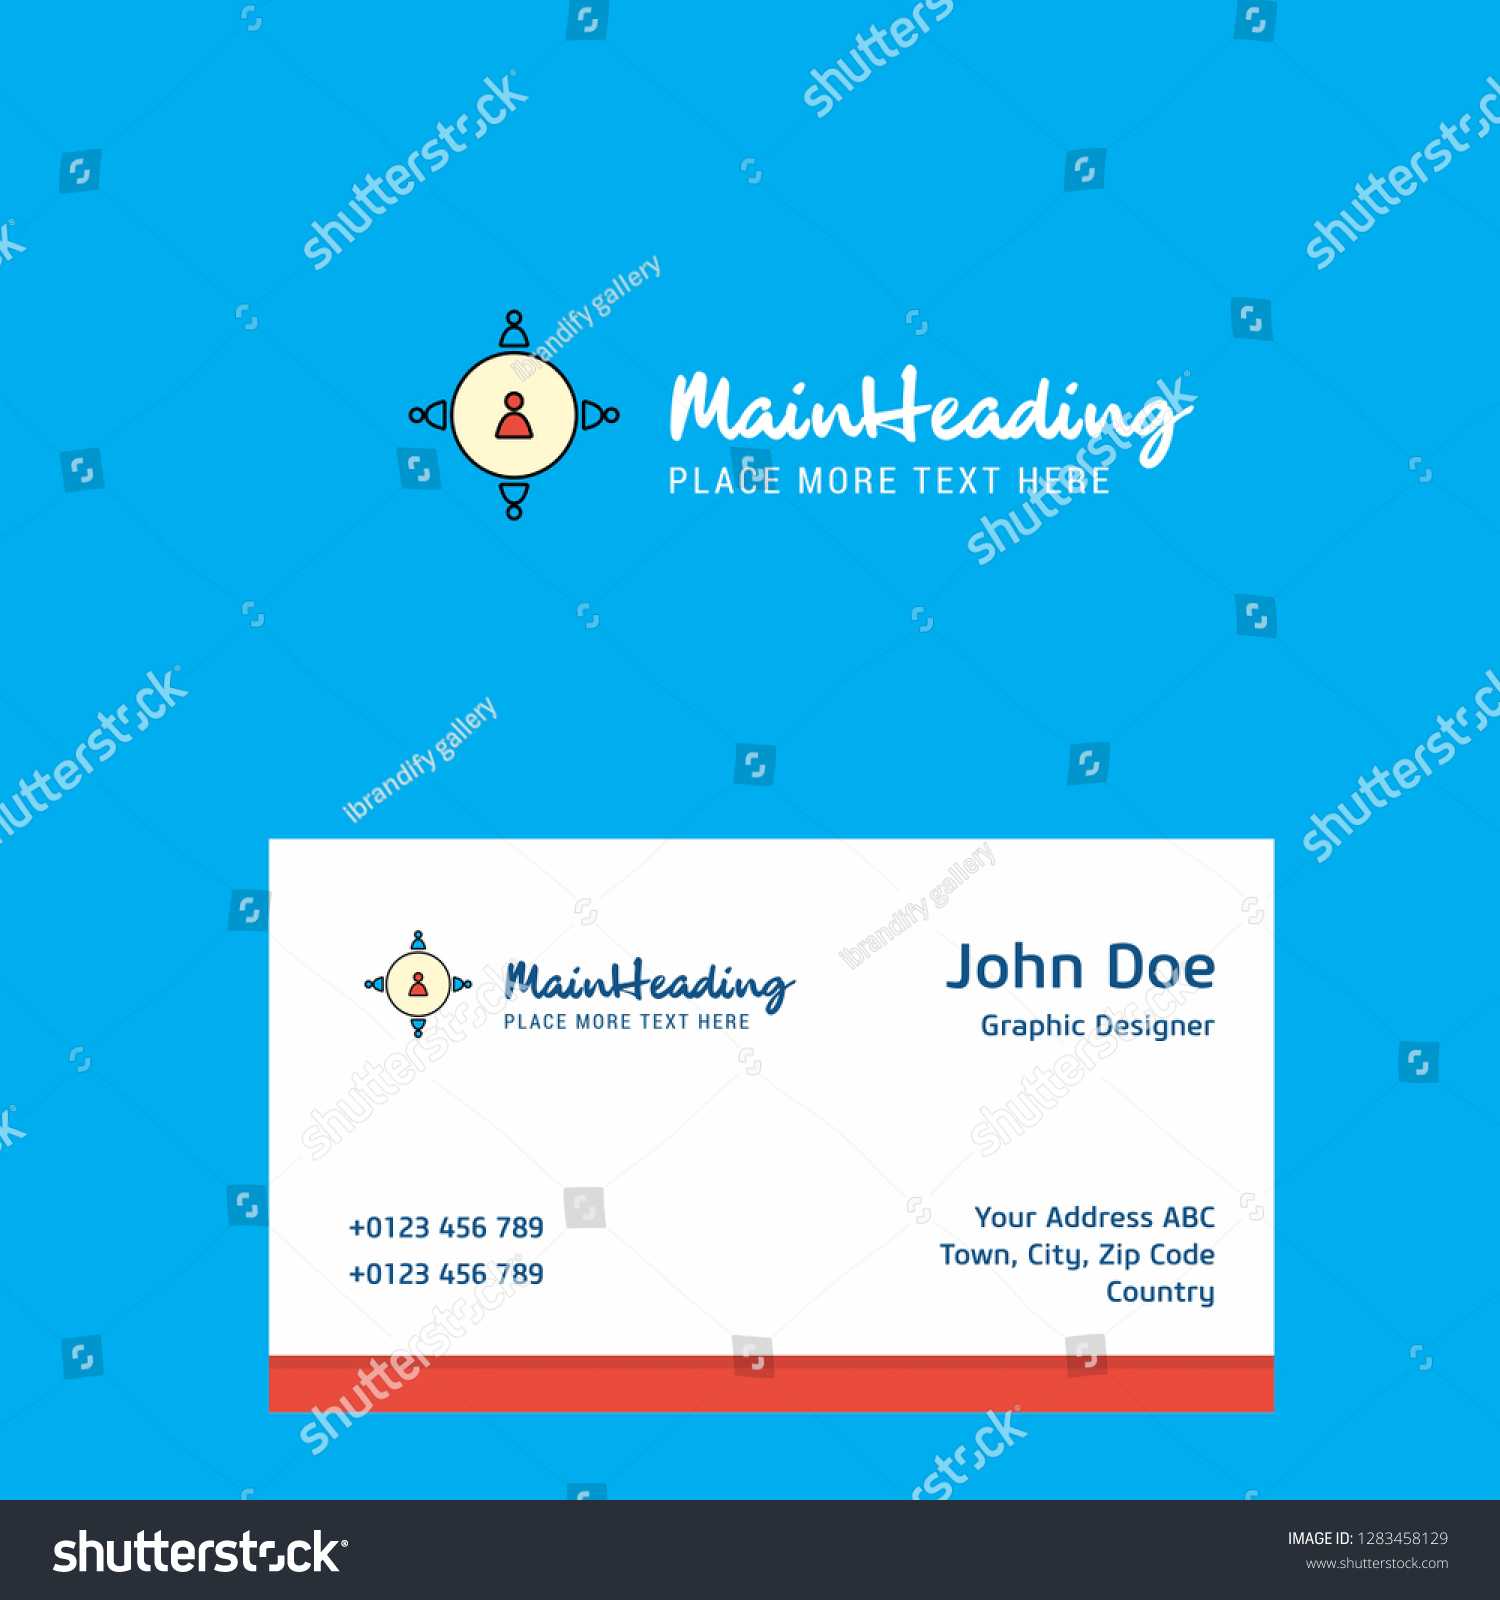 Networking Logo Design Business Card Template Stock Vector With Networking Card Template